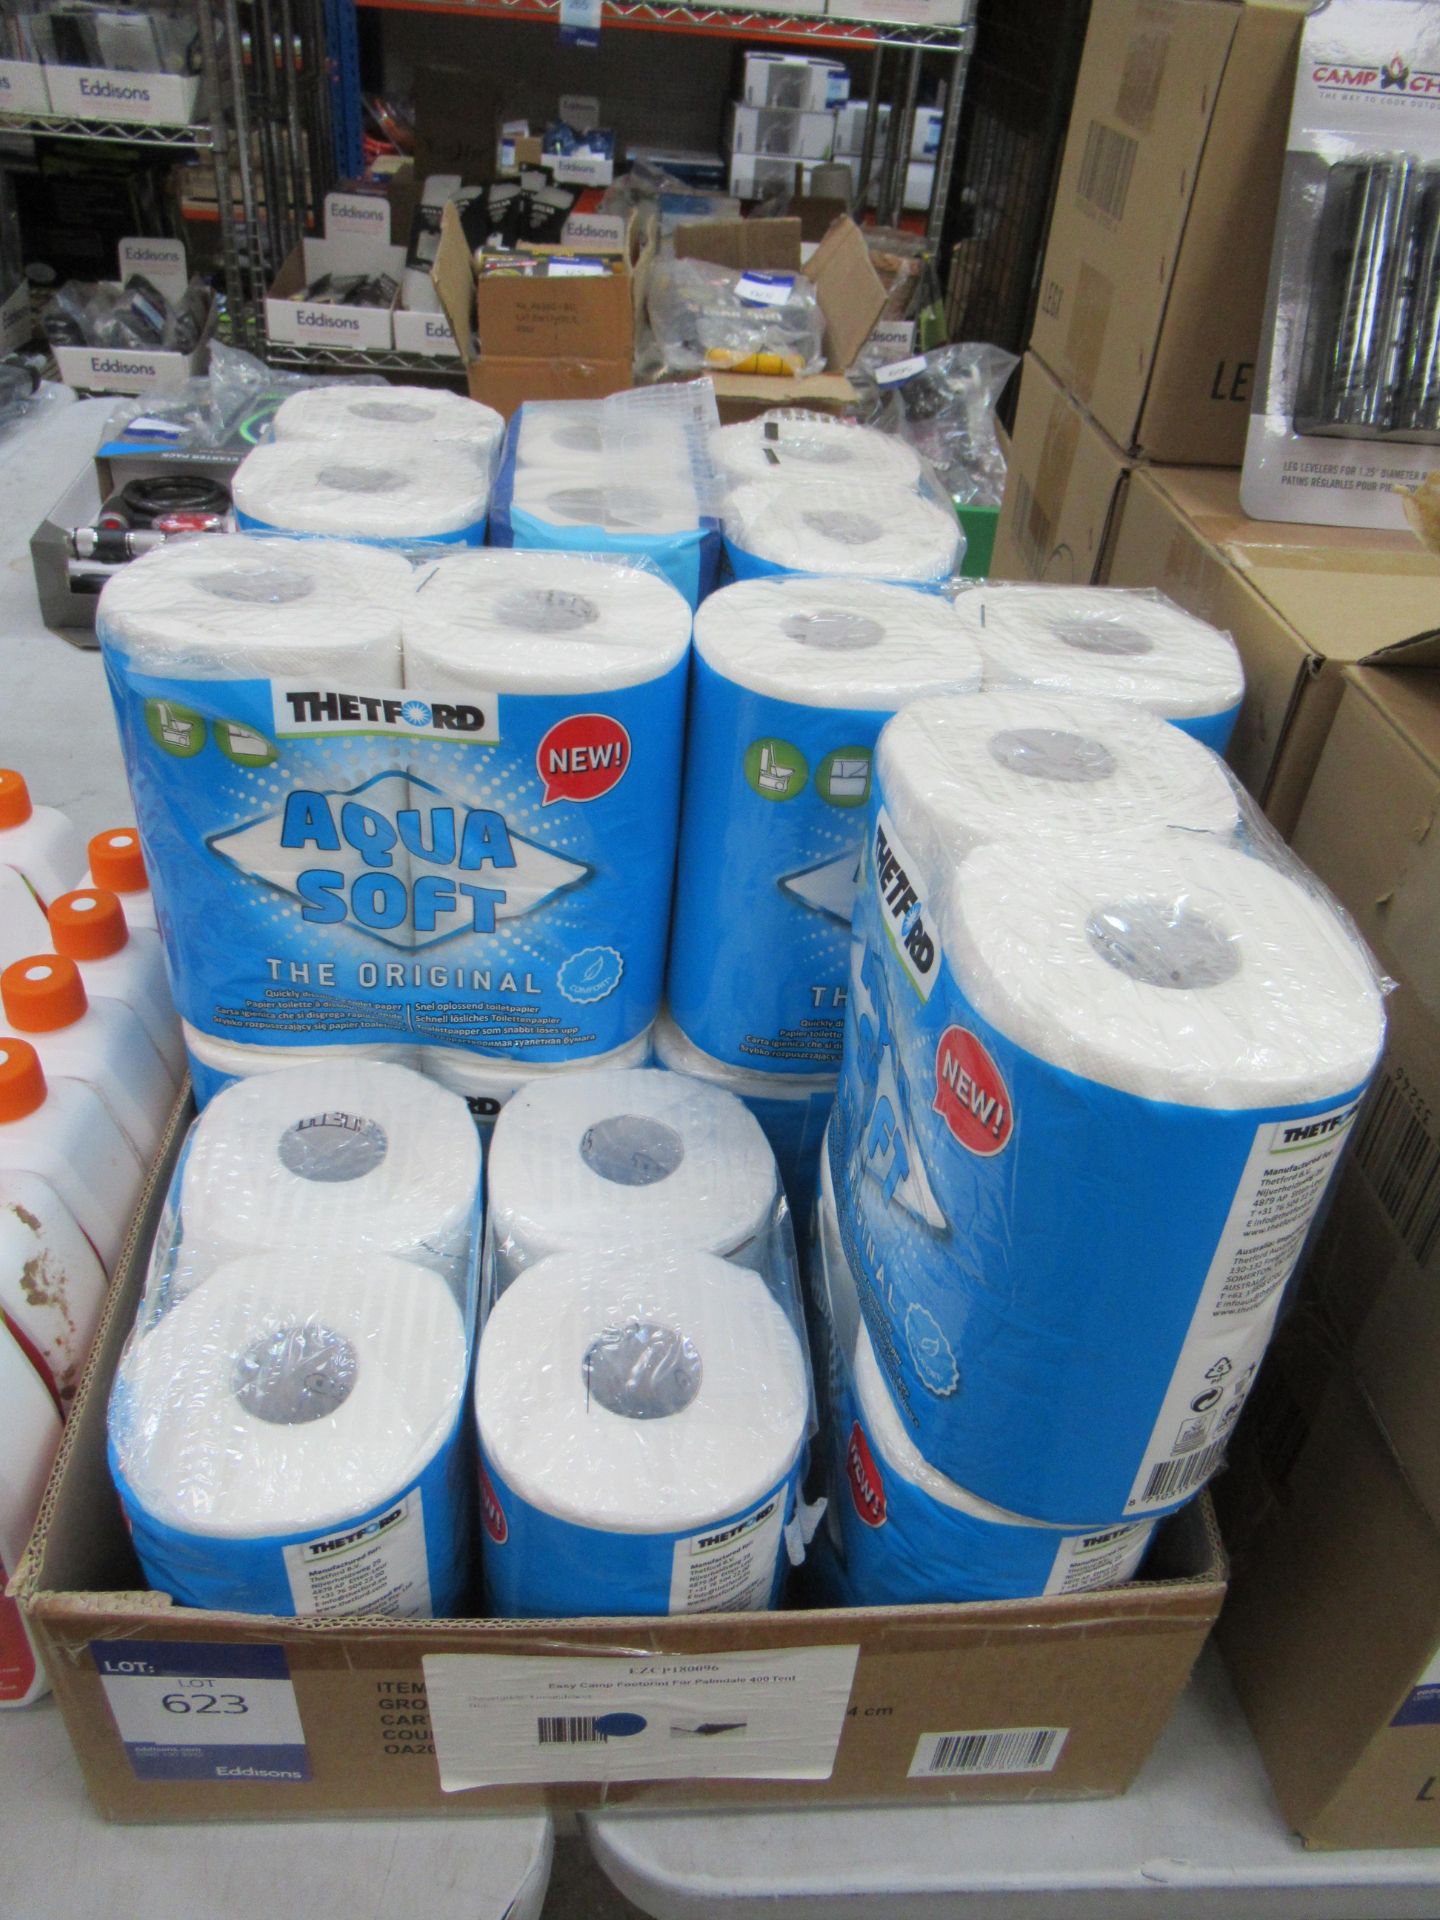 14 x 4 Packs of Dissolving Toilet Tissue (Please note, Viewing Strongly Recommended - Eddisons